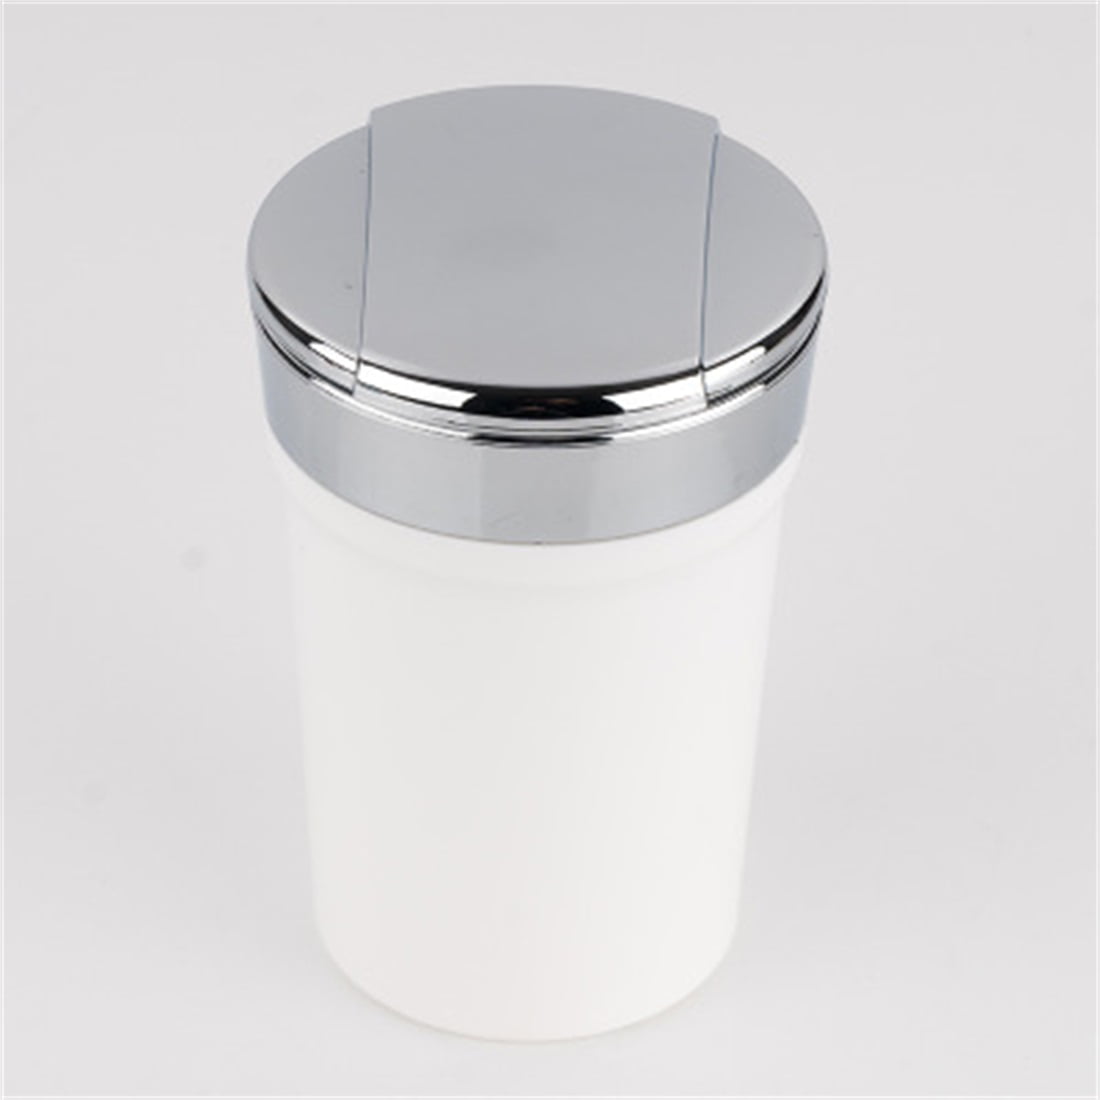 Ashtray with lid Home Use car ashtray with lid smell proof,smokeless ashtray Windproof for Outdoor Travel Mini Car Trash Can Detachable Coffee Cup Design Plastic Smokeless Ashtray for Car,Portable Ashtray for Car 